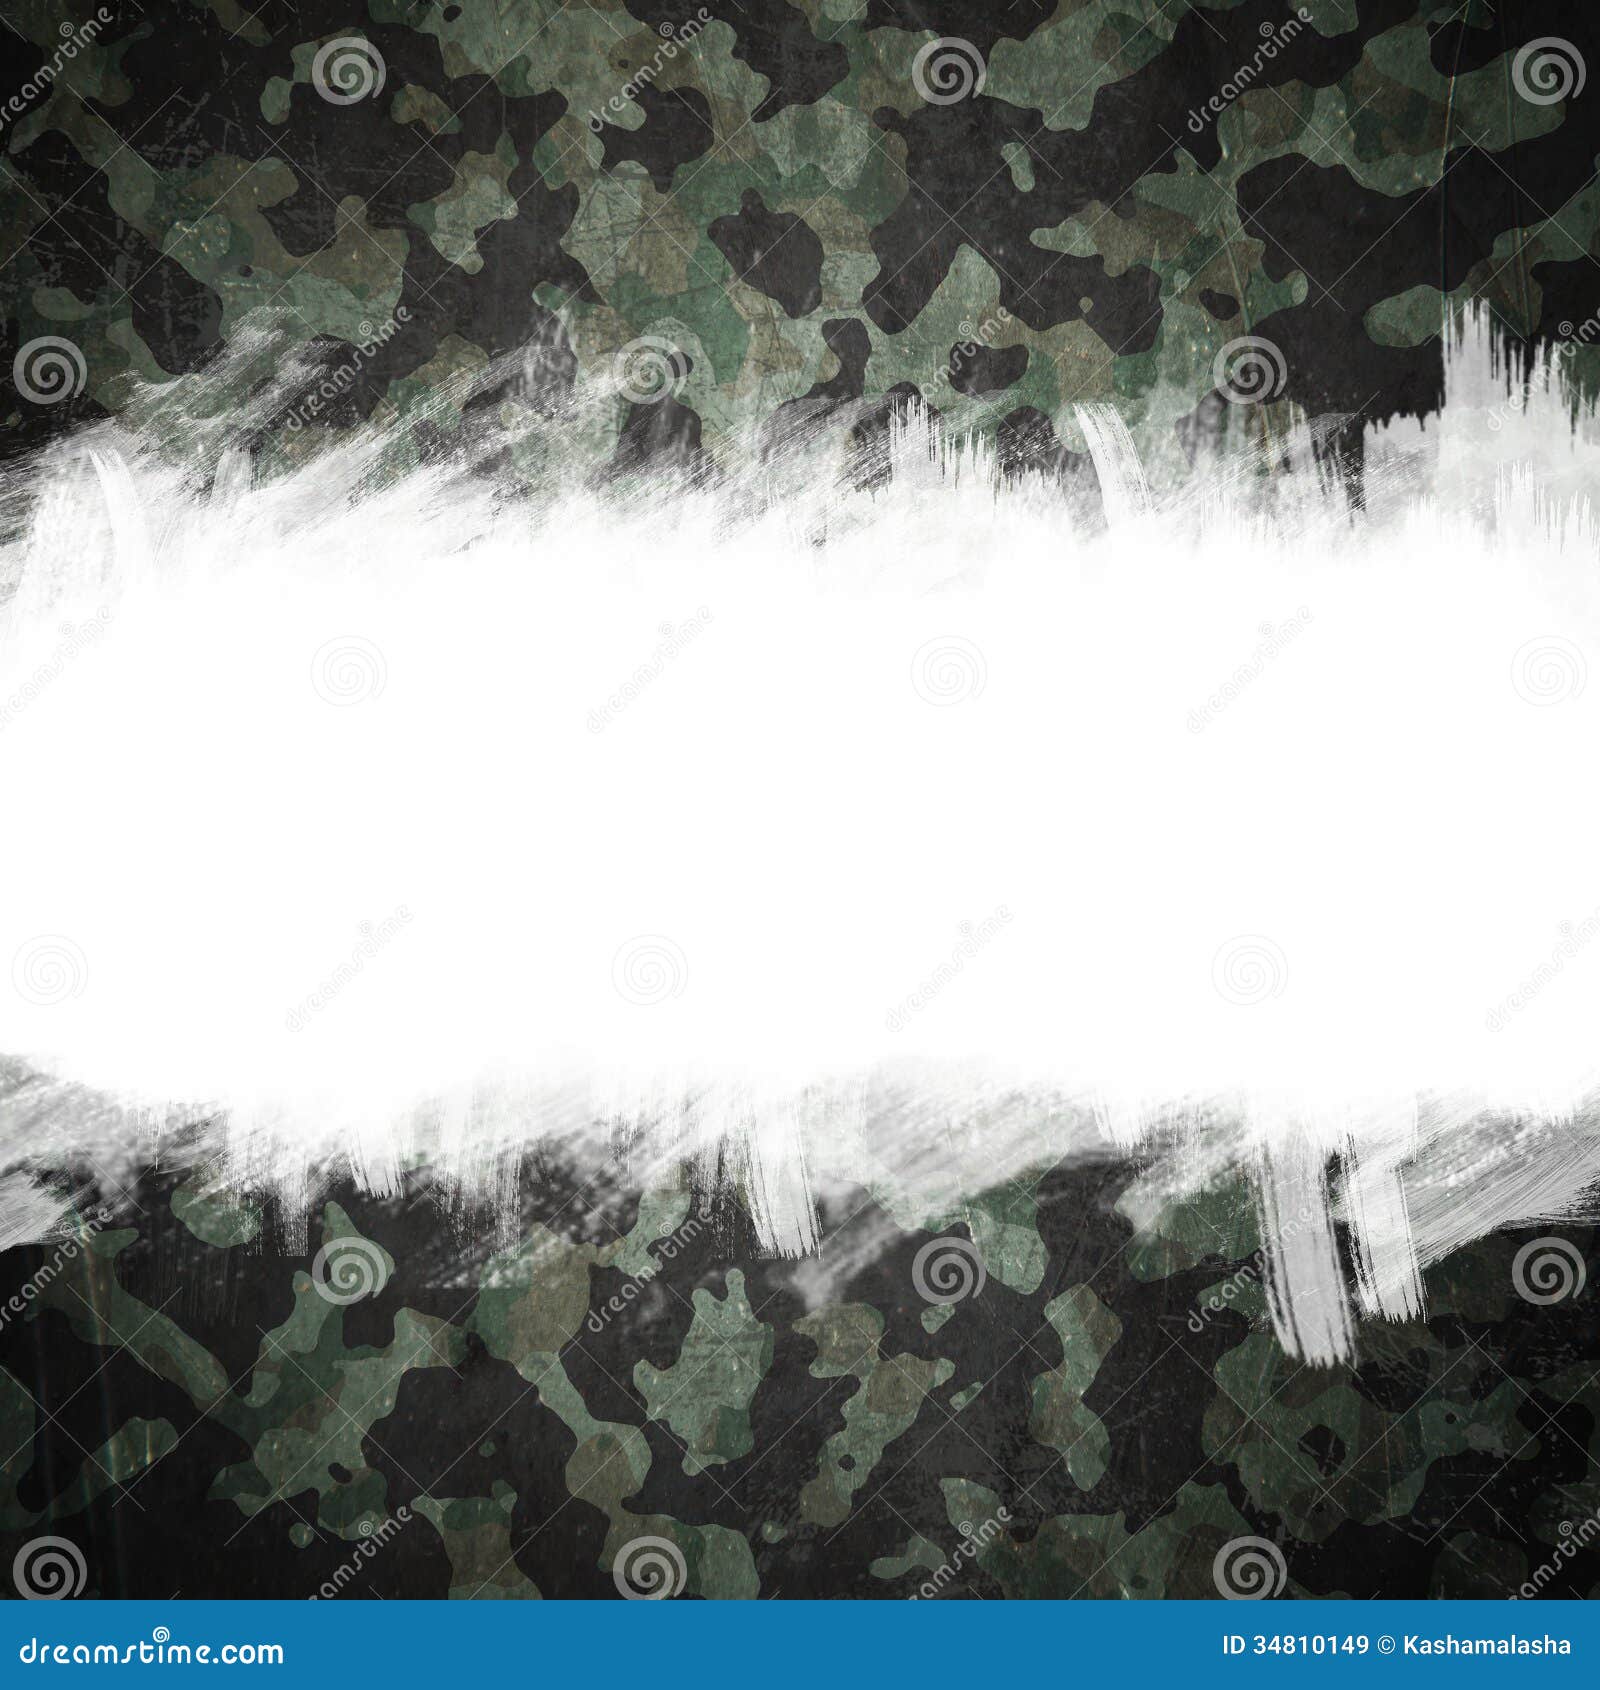 military background clipart - photo #49